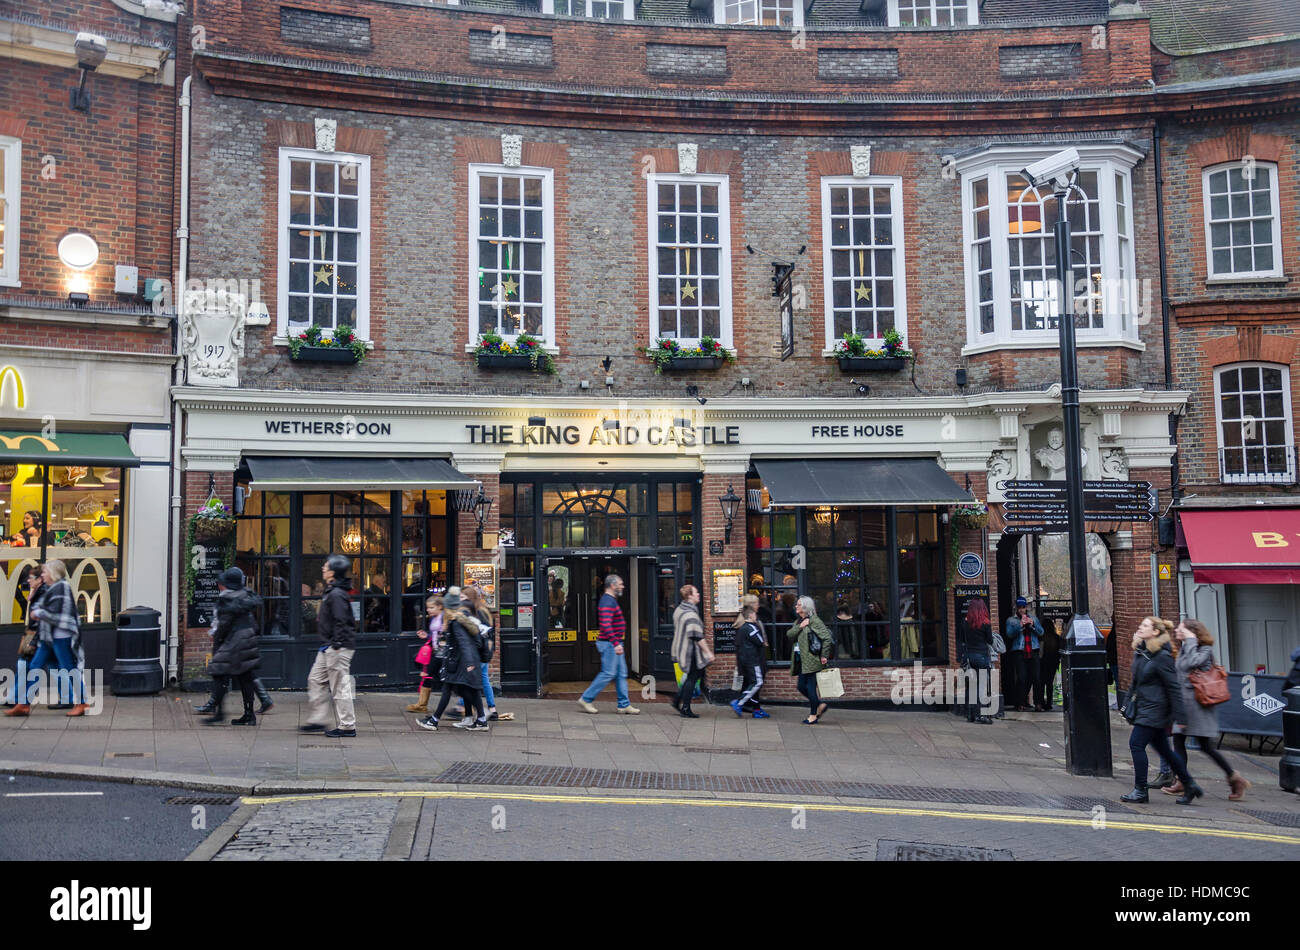 The King and Castle is a Weatherspoon pub on Thames Street in Windsor, Berkshire, UK. Stock Photo